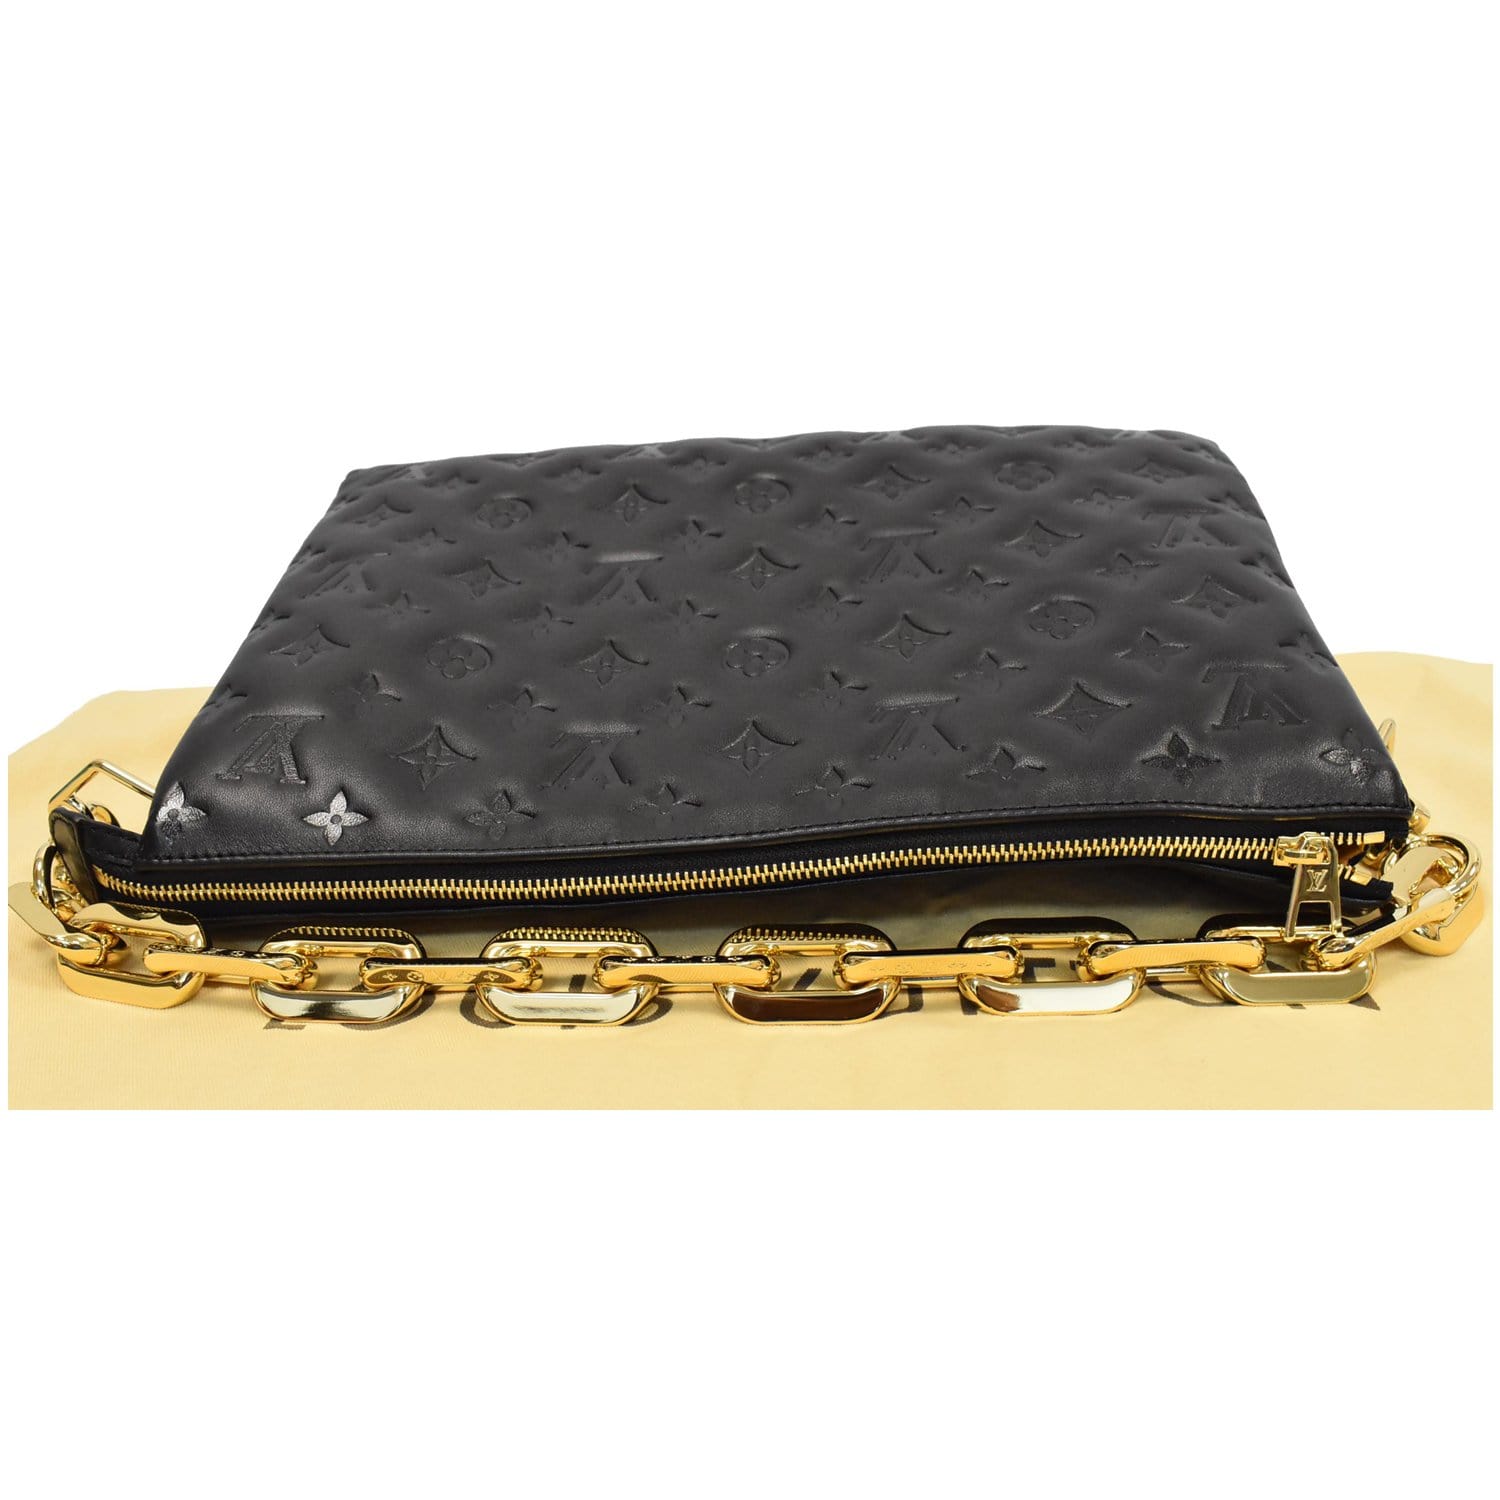 Louis Vuitton Black Monogram Embossed Puffy Leather Coussin iPhone